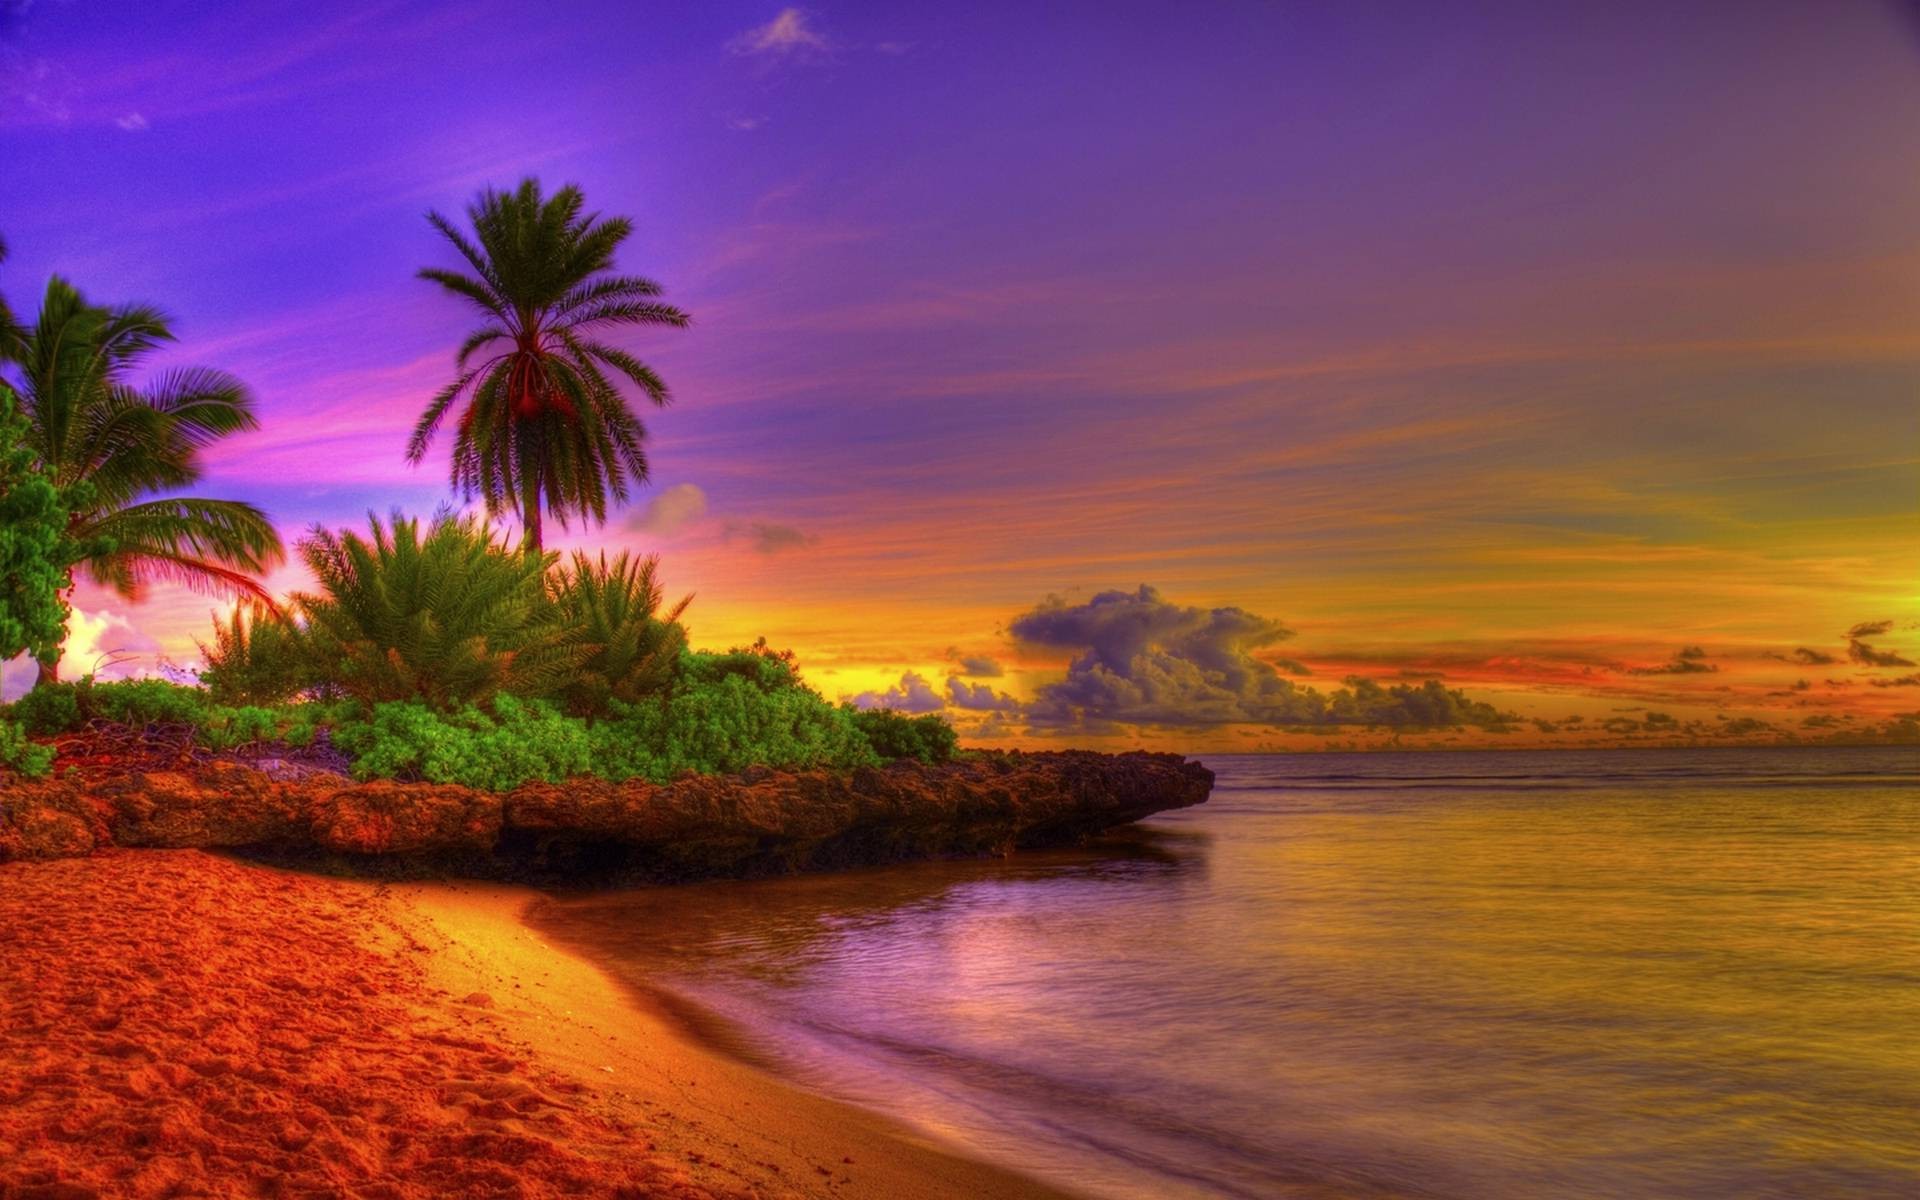 Colorful Sunrise Tropical Beach Image - Beautiful Beach Sunset Backgrounds , HD Wallpaper & Backgrounds